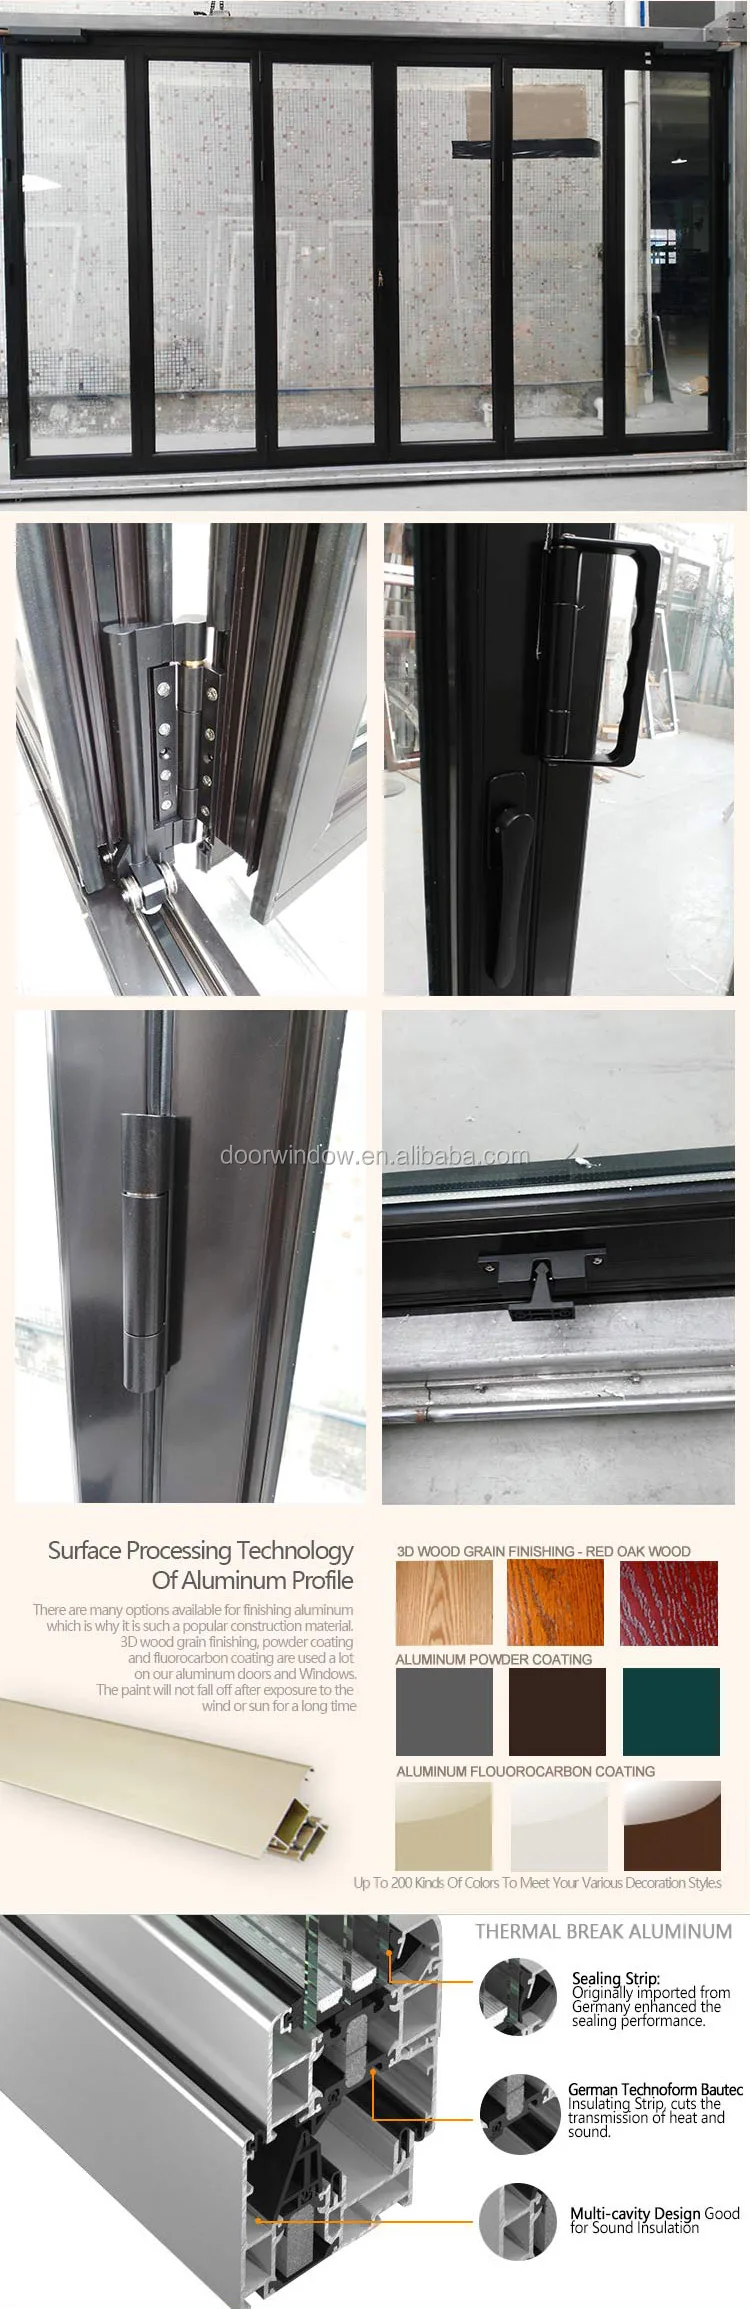 Hot selling products Bi-fold Door With Double Glazed Bi Folding aluminum window and door with fly screen